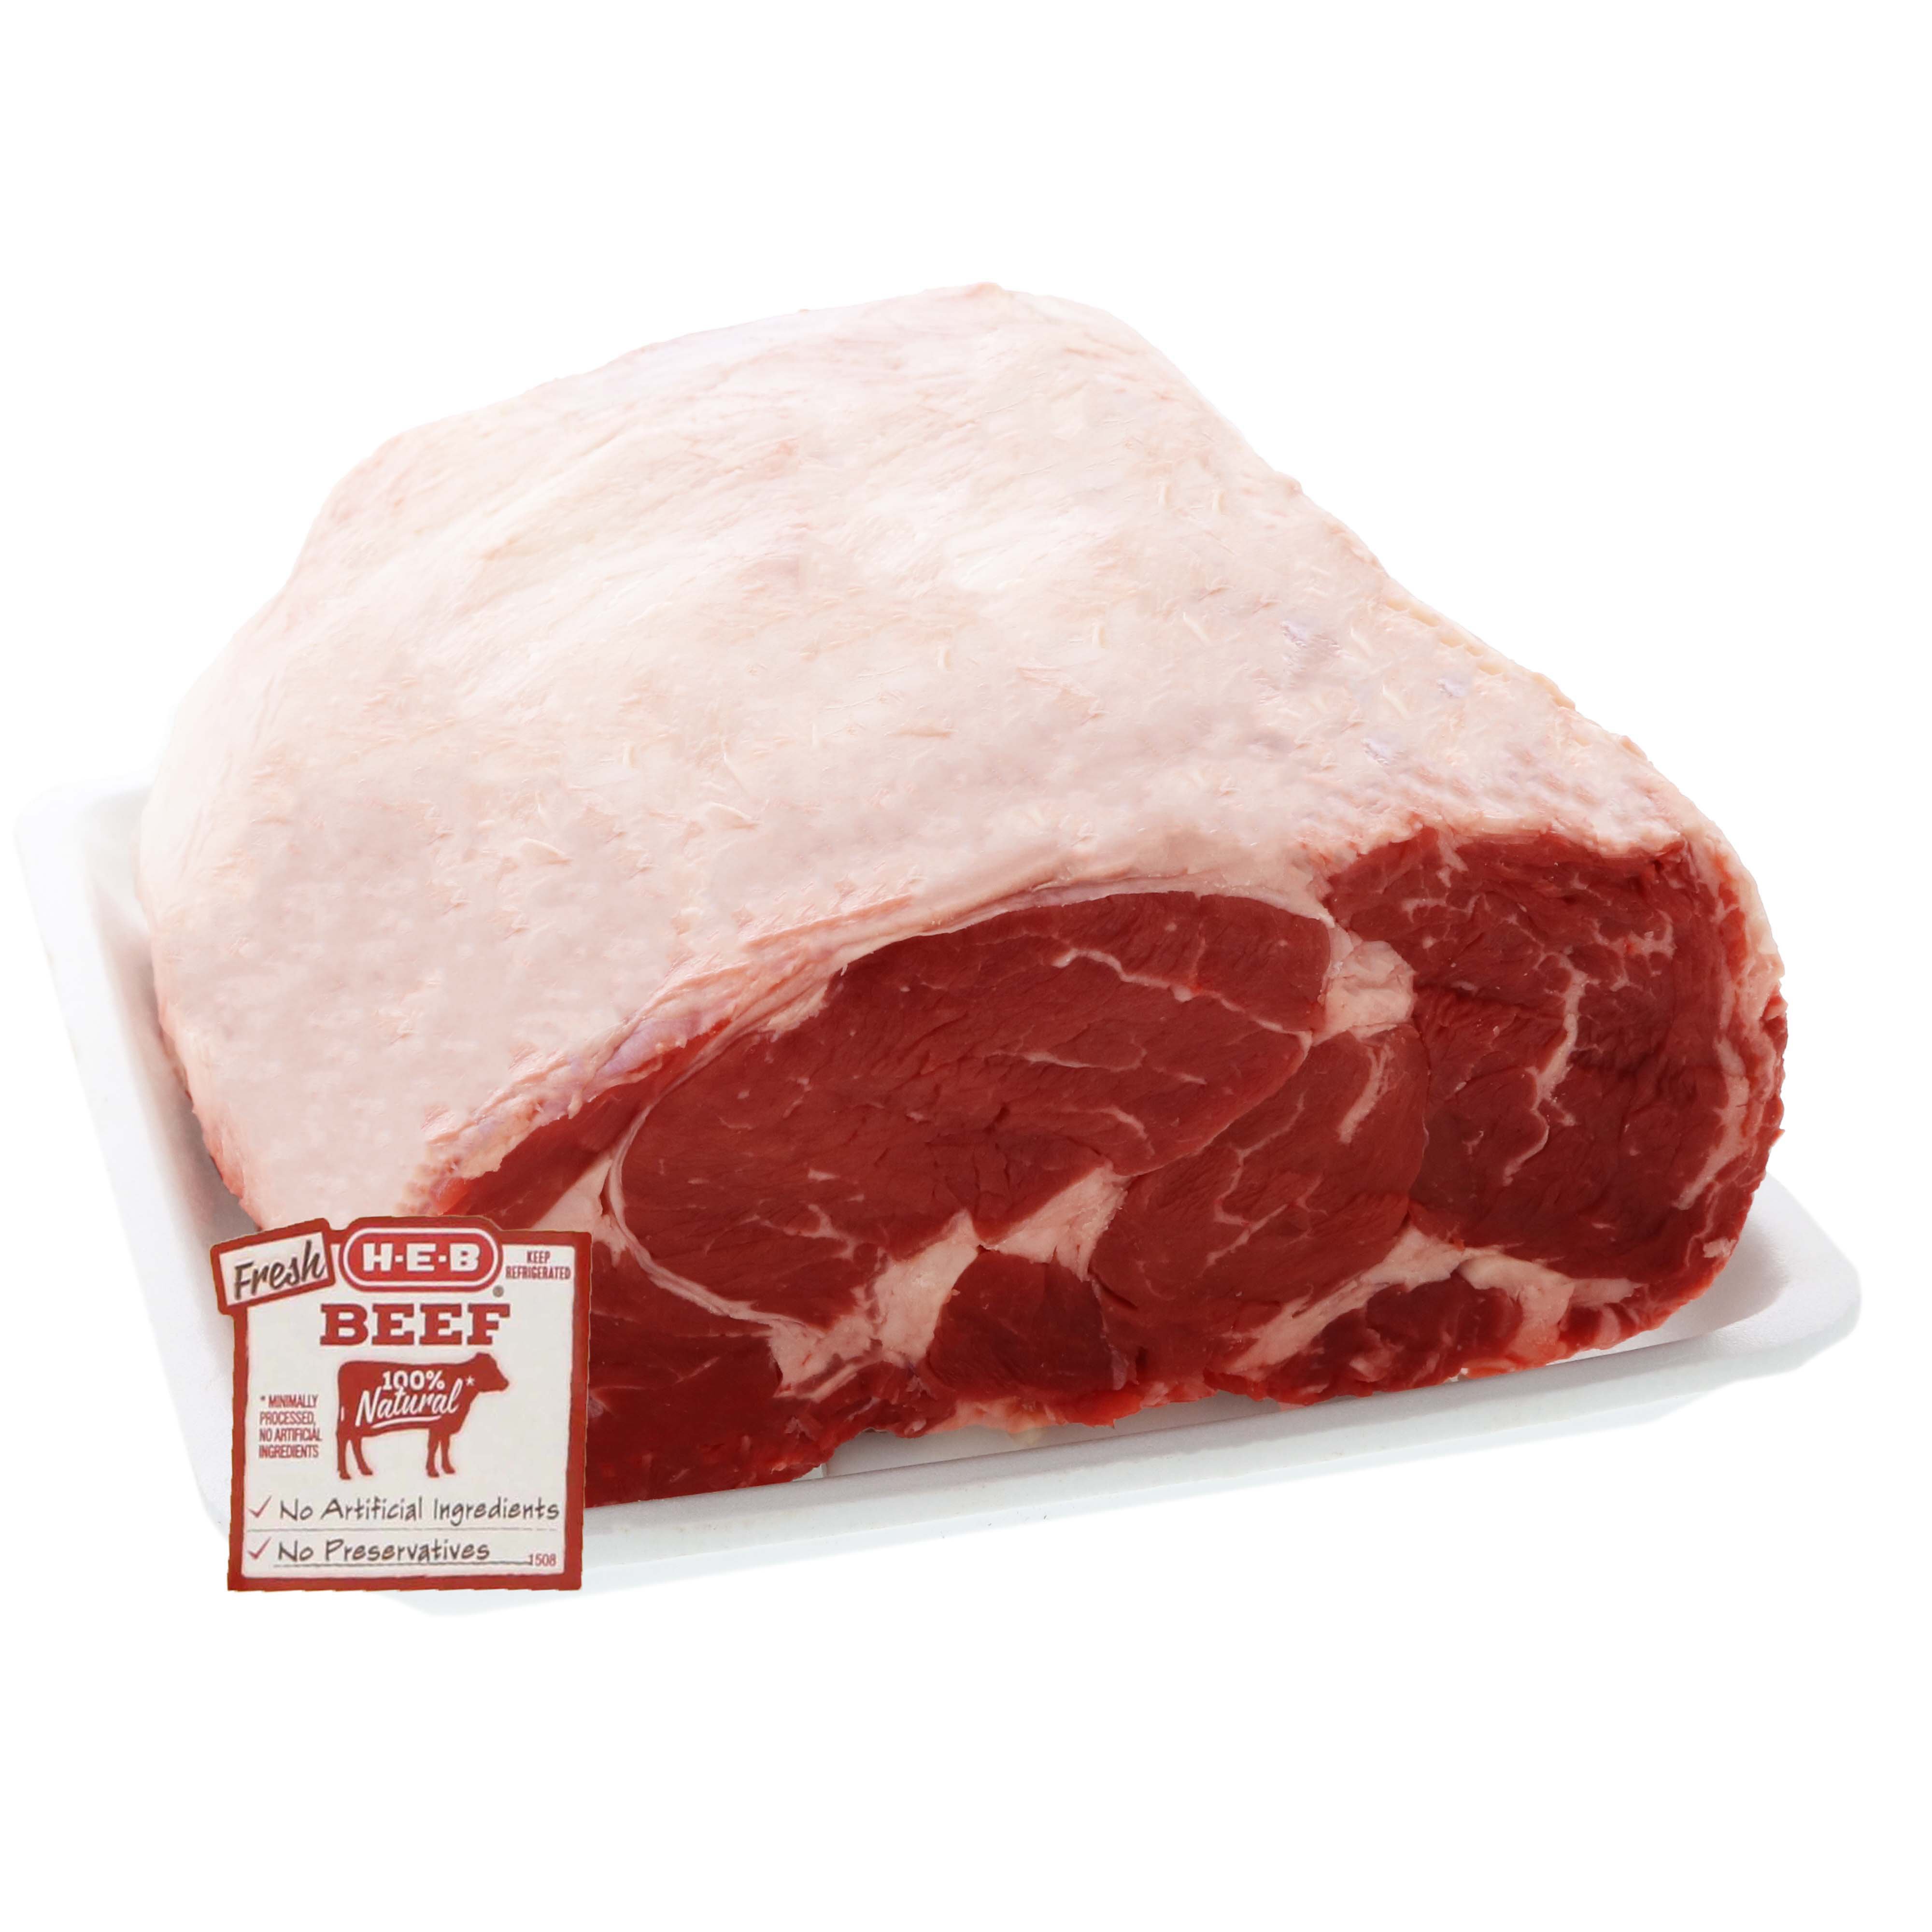 H E B Beef Ribeye Roast Boneless Large End 3 Ribs Usda Select Shop Beef At H E B,Easy Lunches For Kids